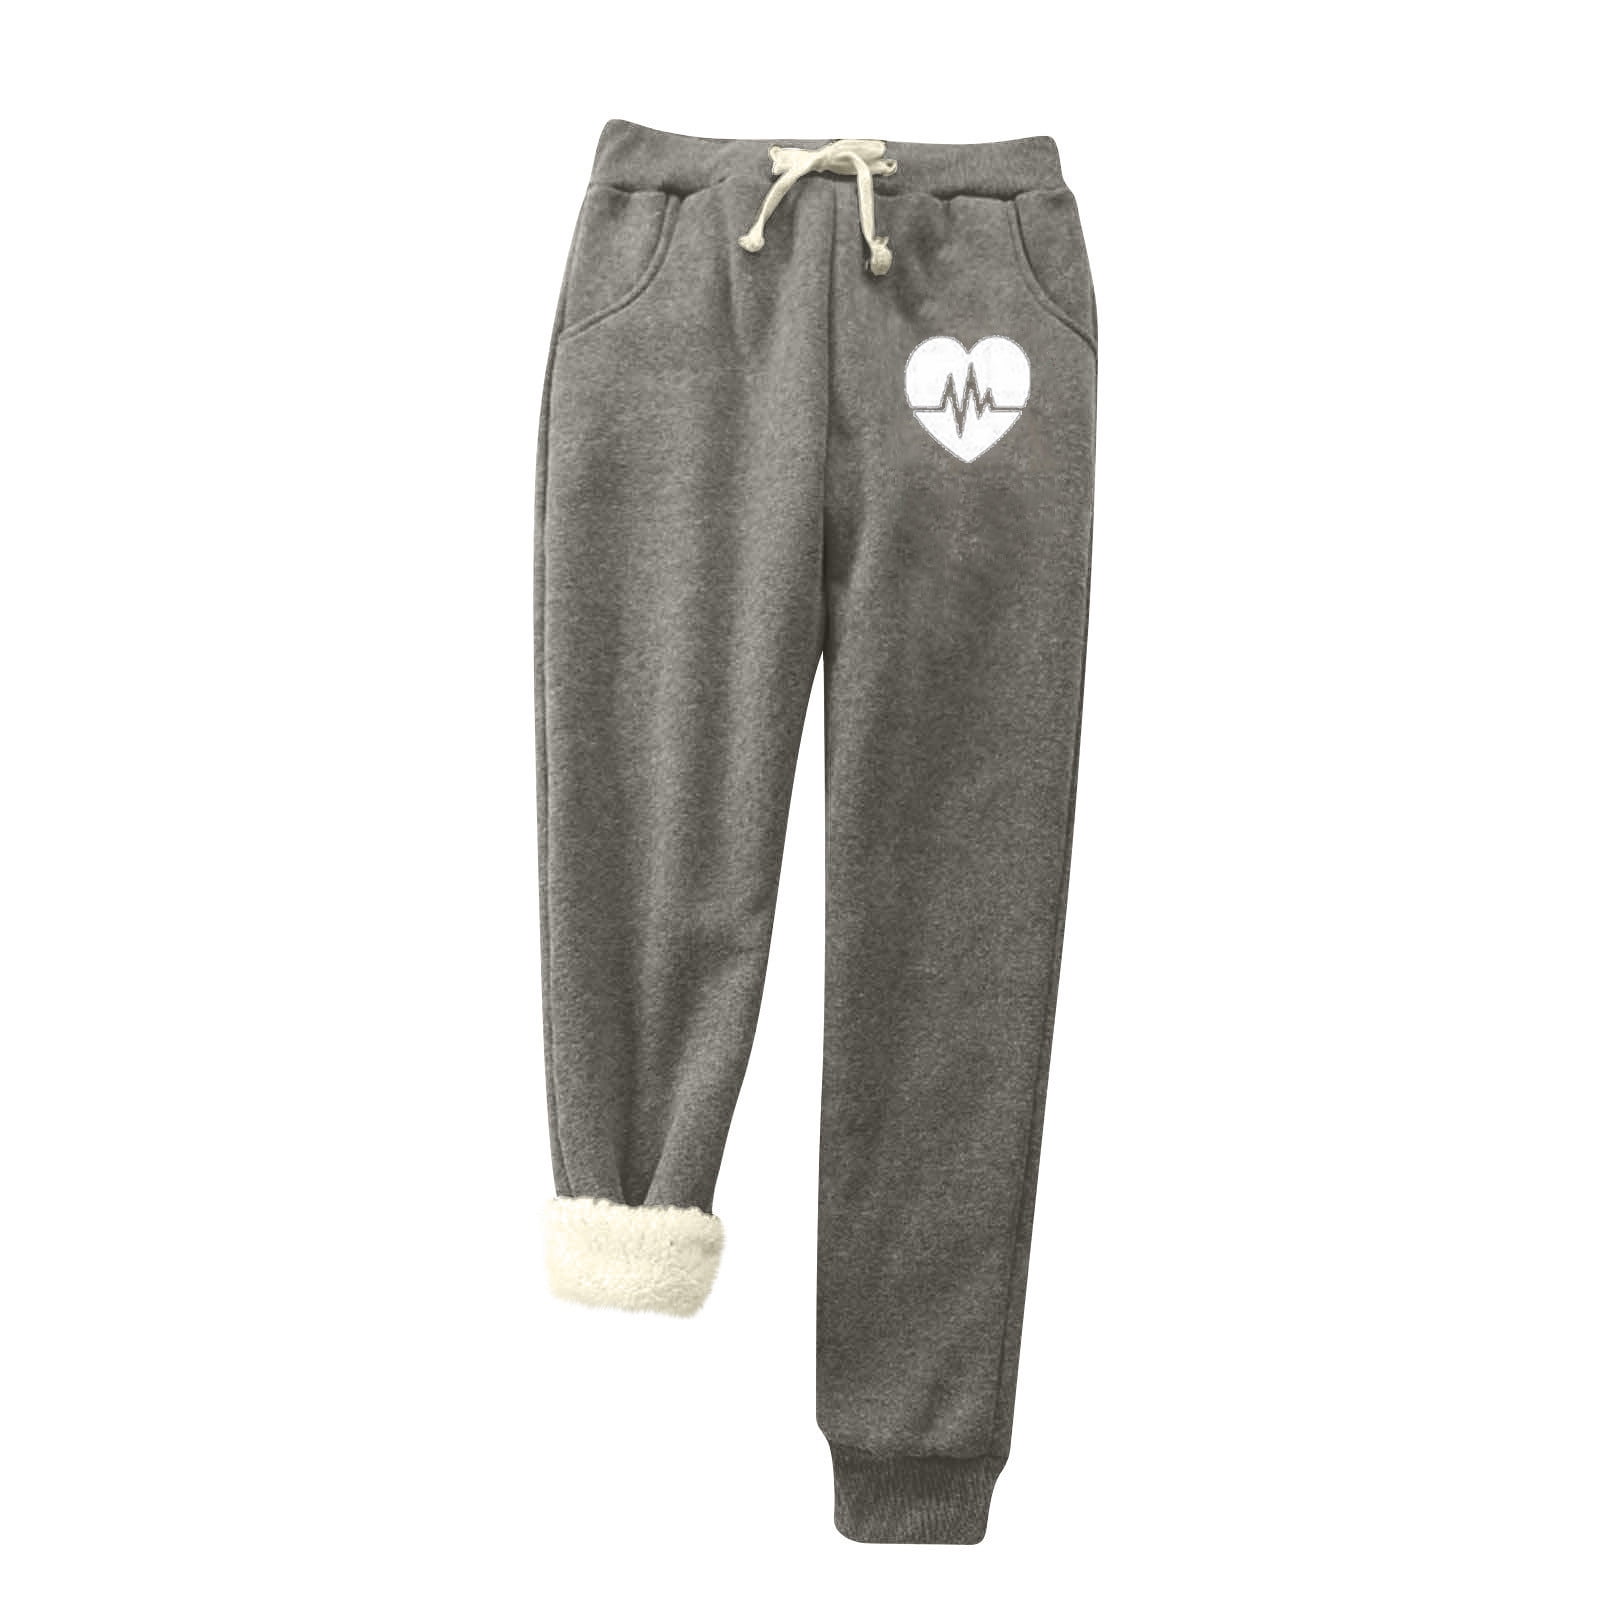 RQYYD Women's High Waisted Baggy Sweatpants with Pockets Heart Print Comfy  Cotton High Waist Jogger Warm Fleece Lined Drawstring Trousers Dark Gray  XXL 